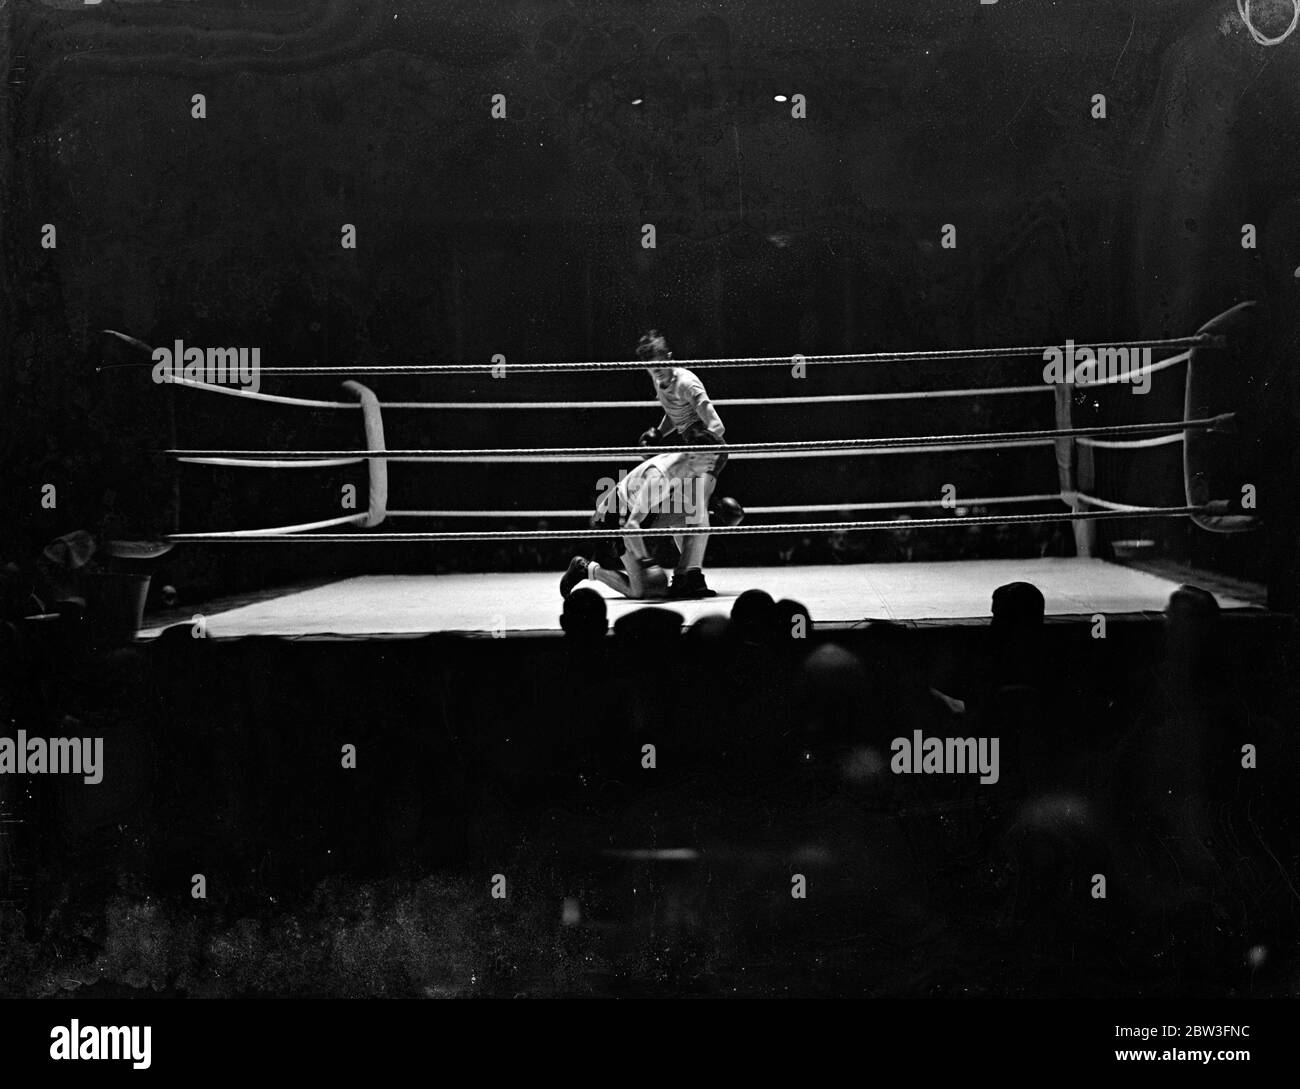 Amateur boxing Black and White Stock Photos and Images image